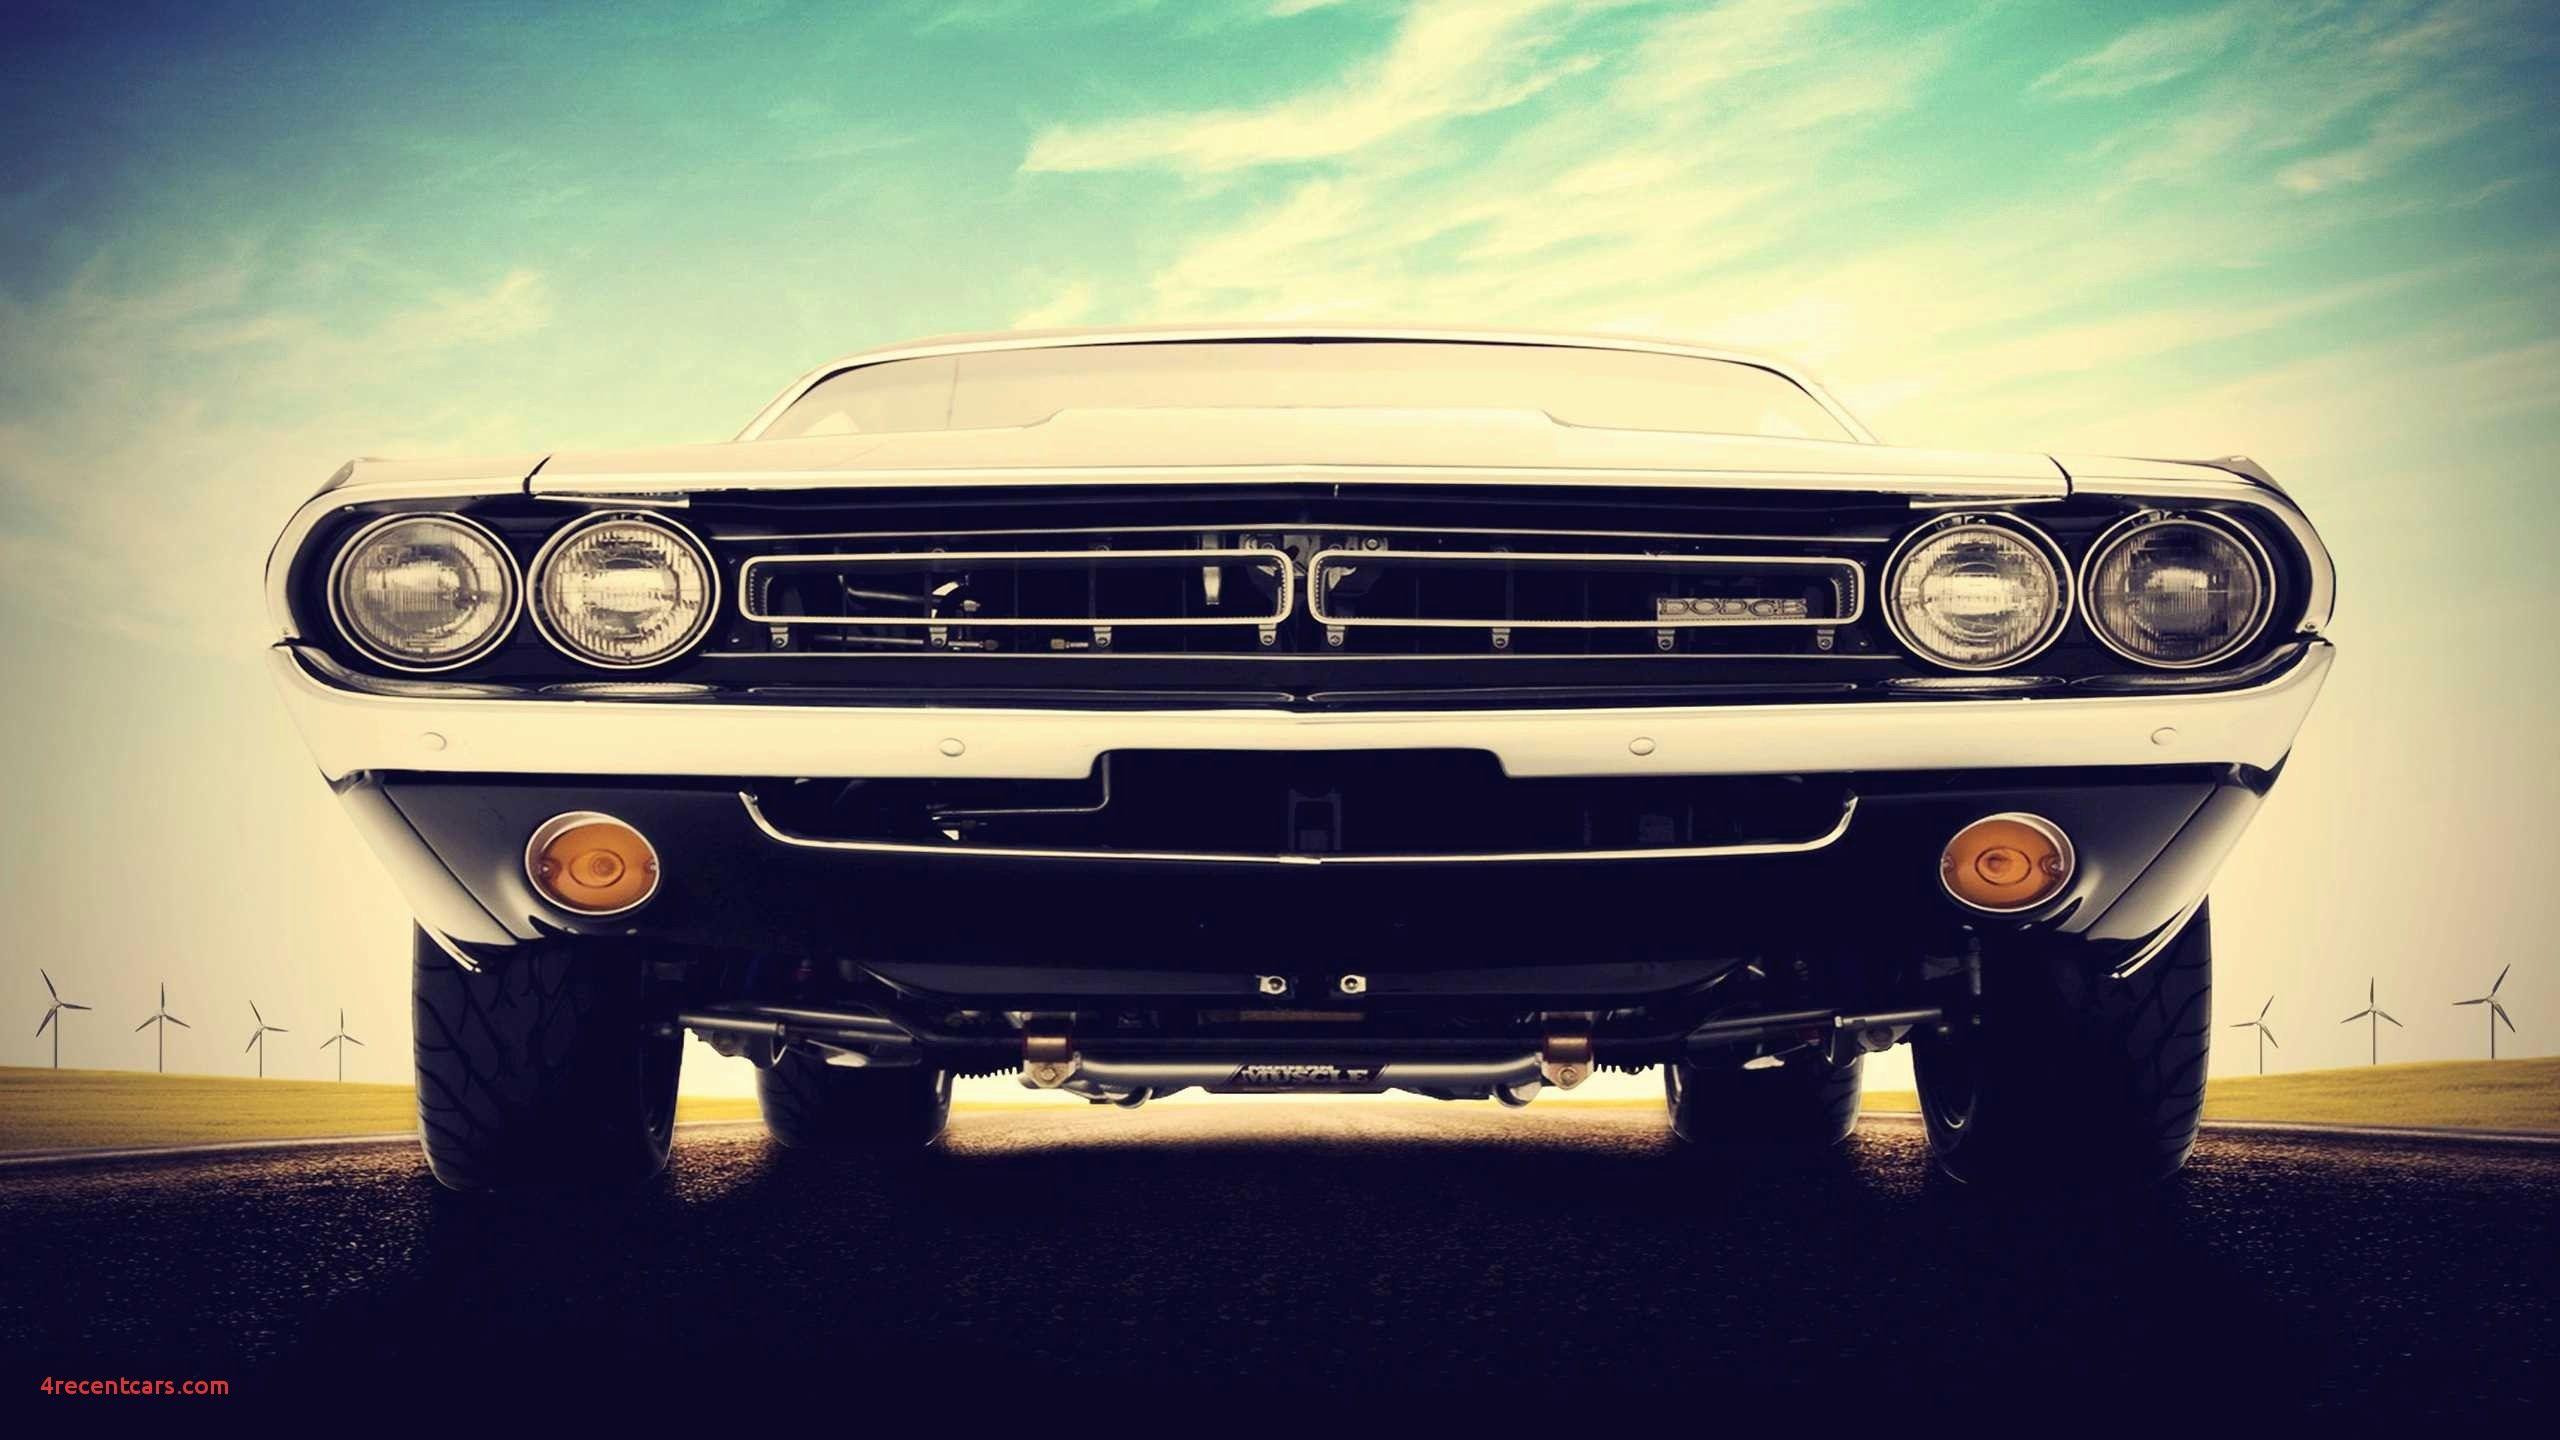 Muscle Cars HD Wallpaper New Muscle Car High Quality Photo Lovely